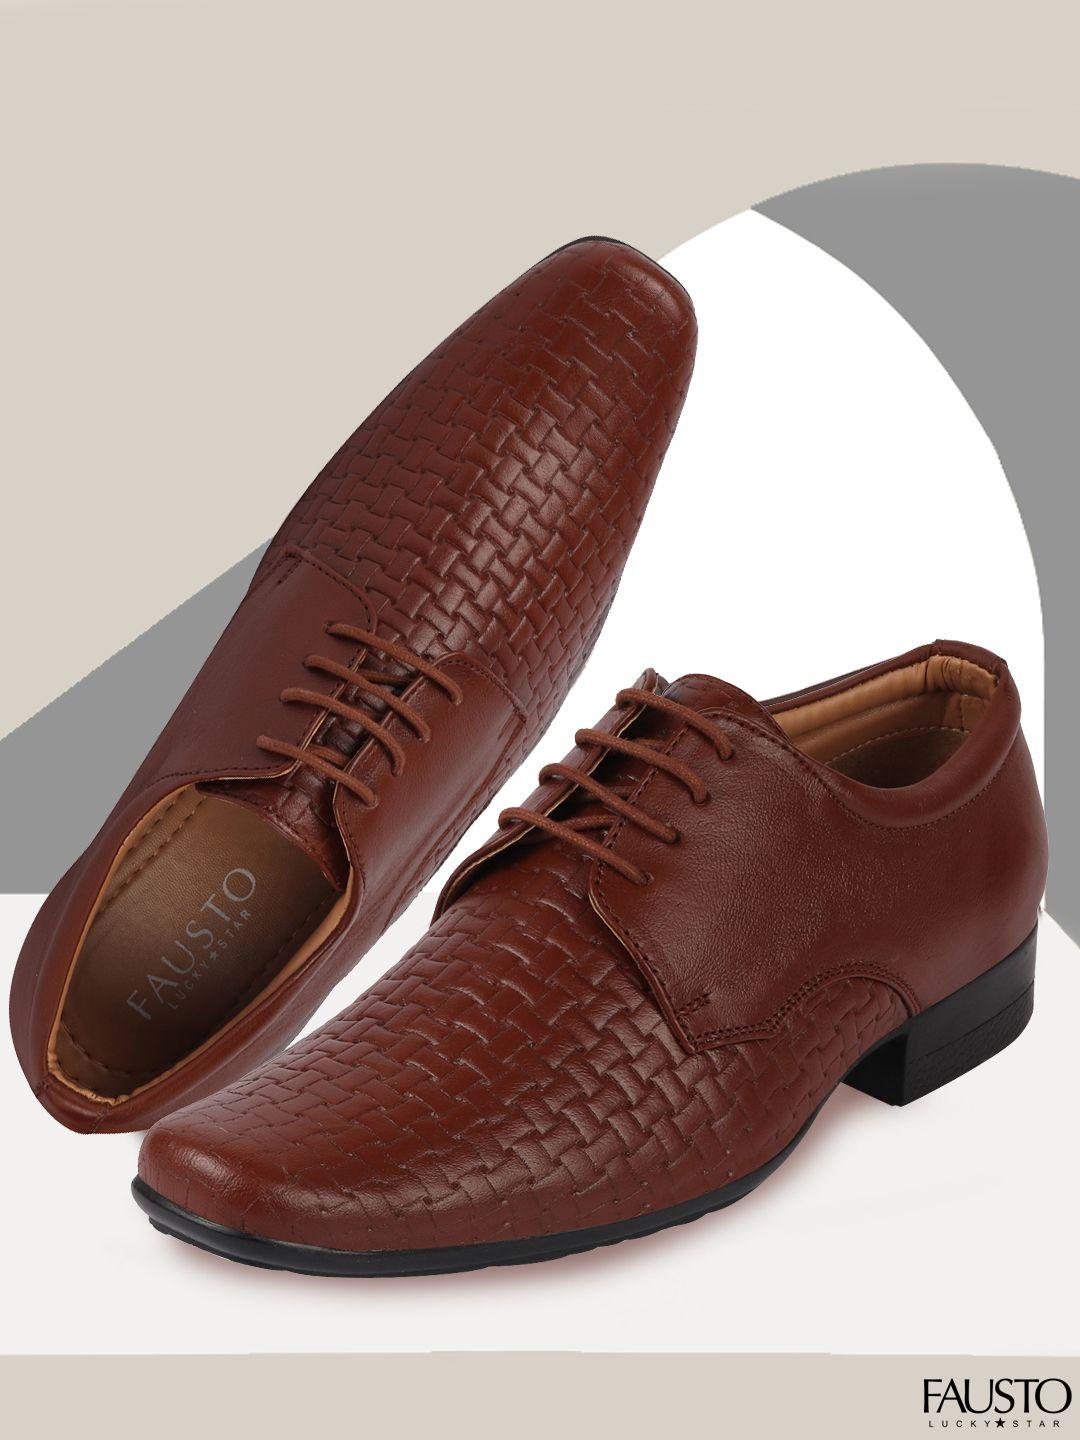 fausto-men-brown-textured-leather-formal-derbys